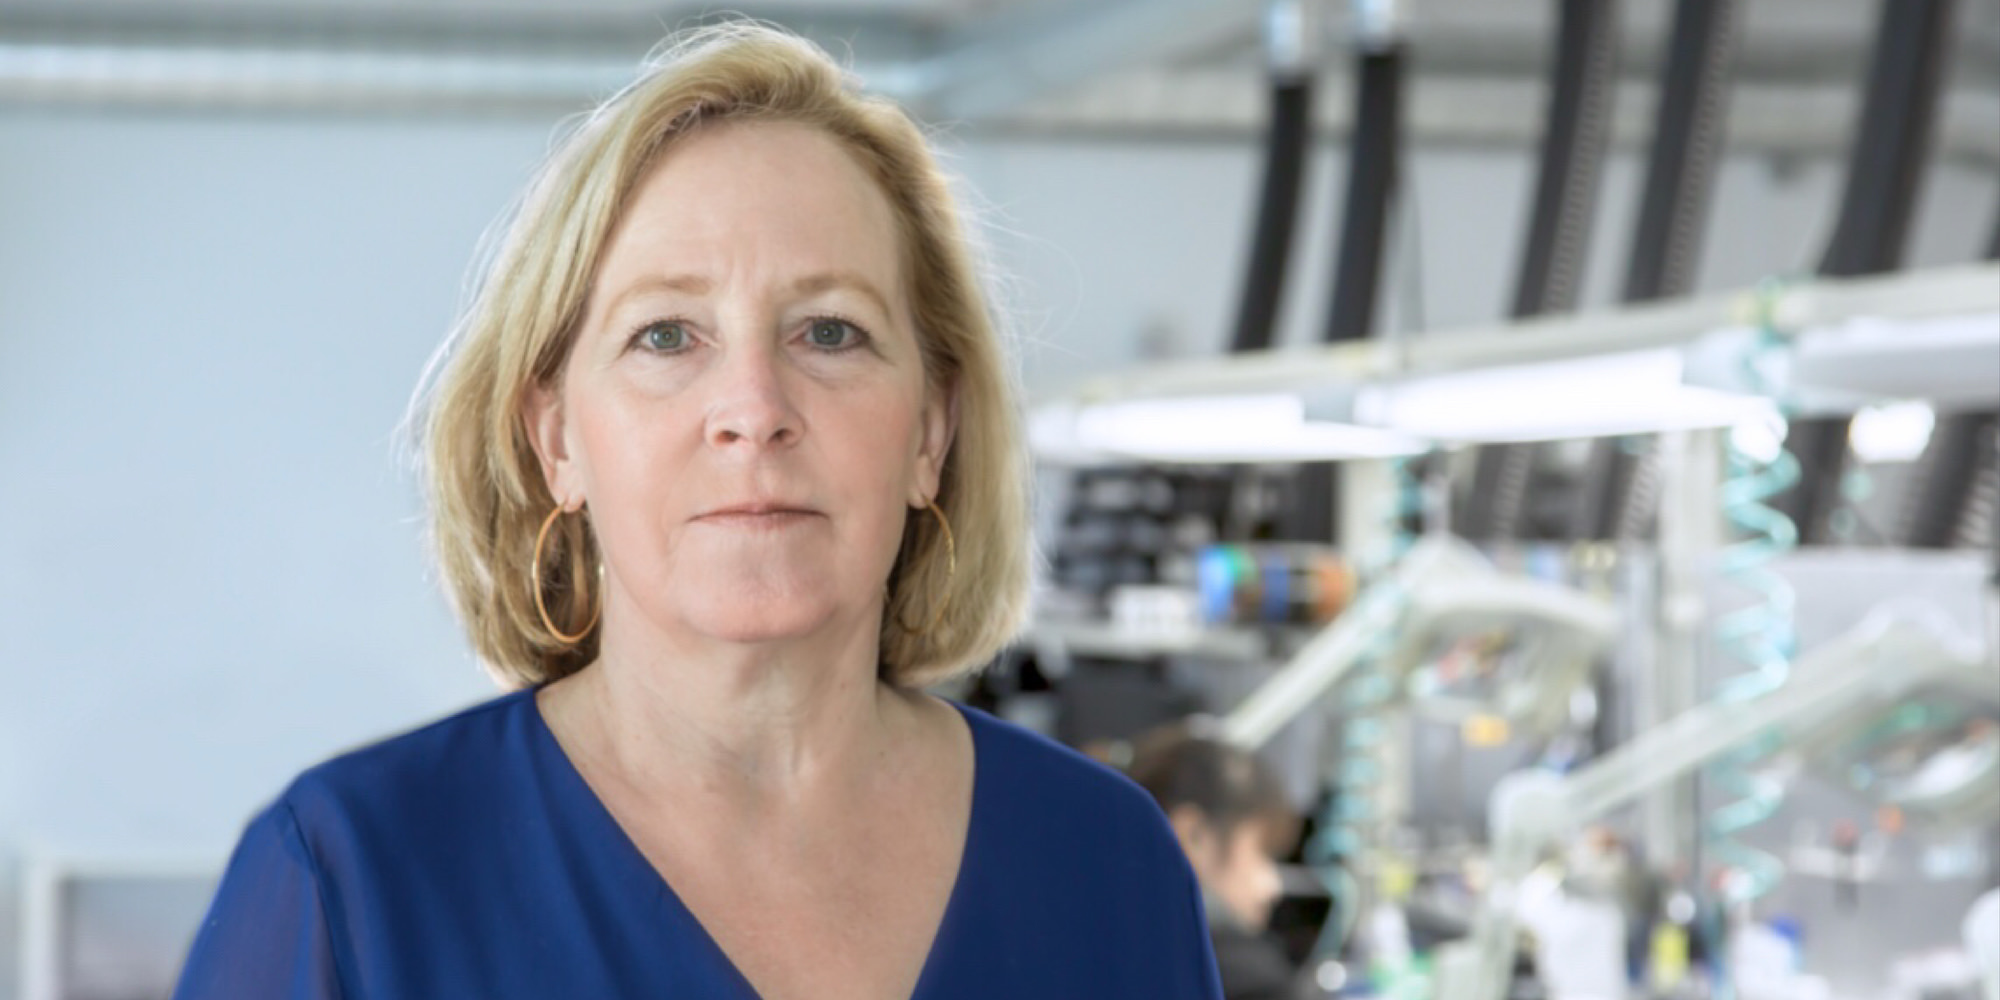 BE Meyers & Co Appoints Laser Manufacturing Expert Sue McGinley As Chief Operating Officer